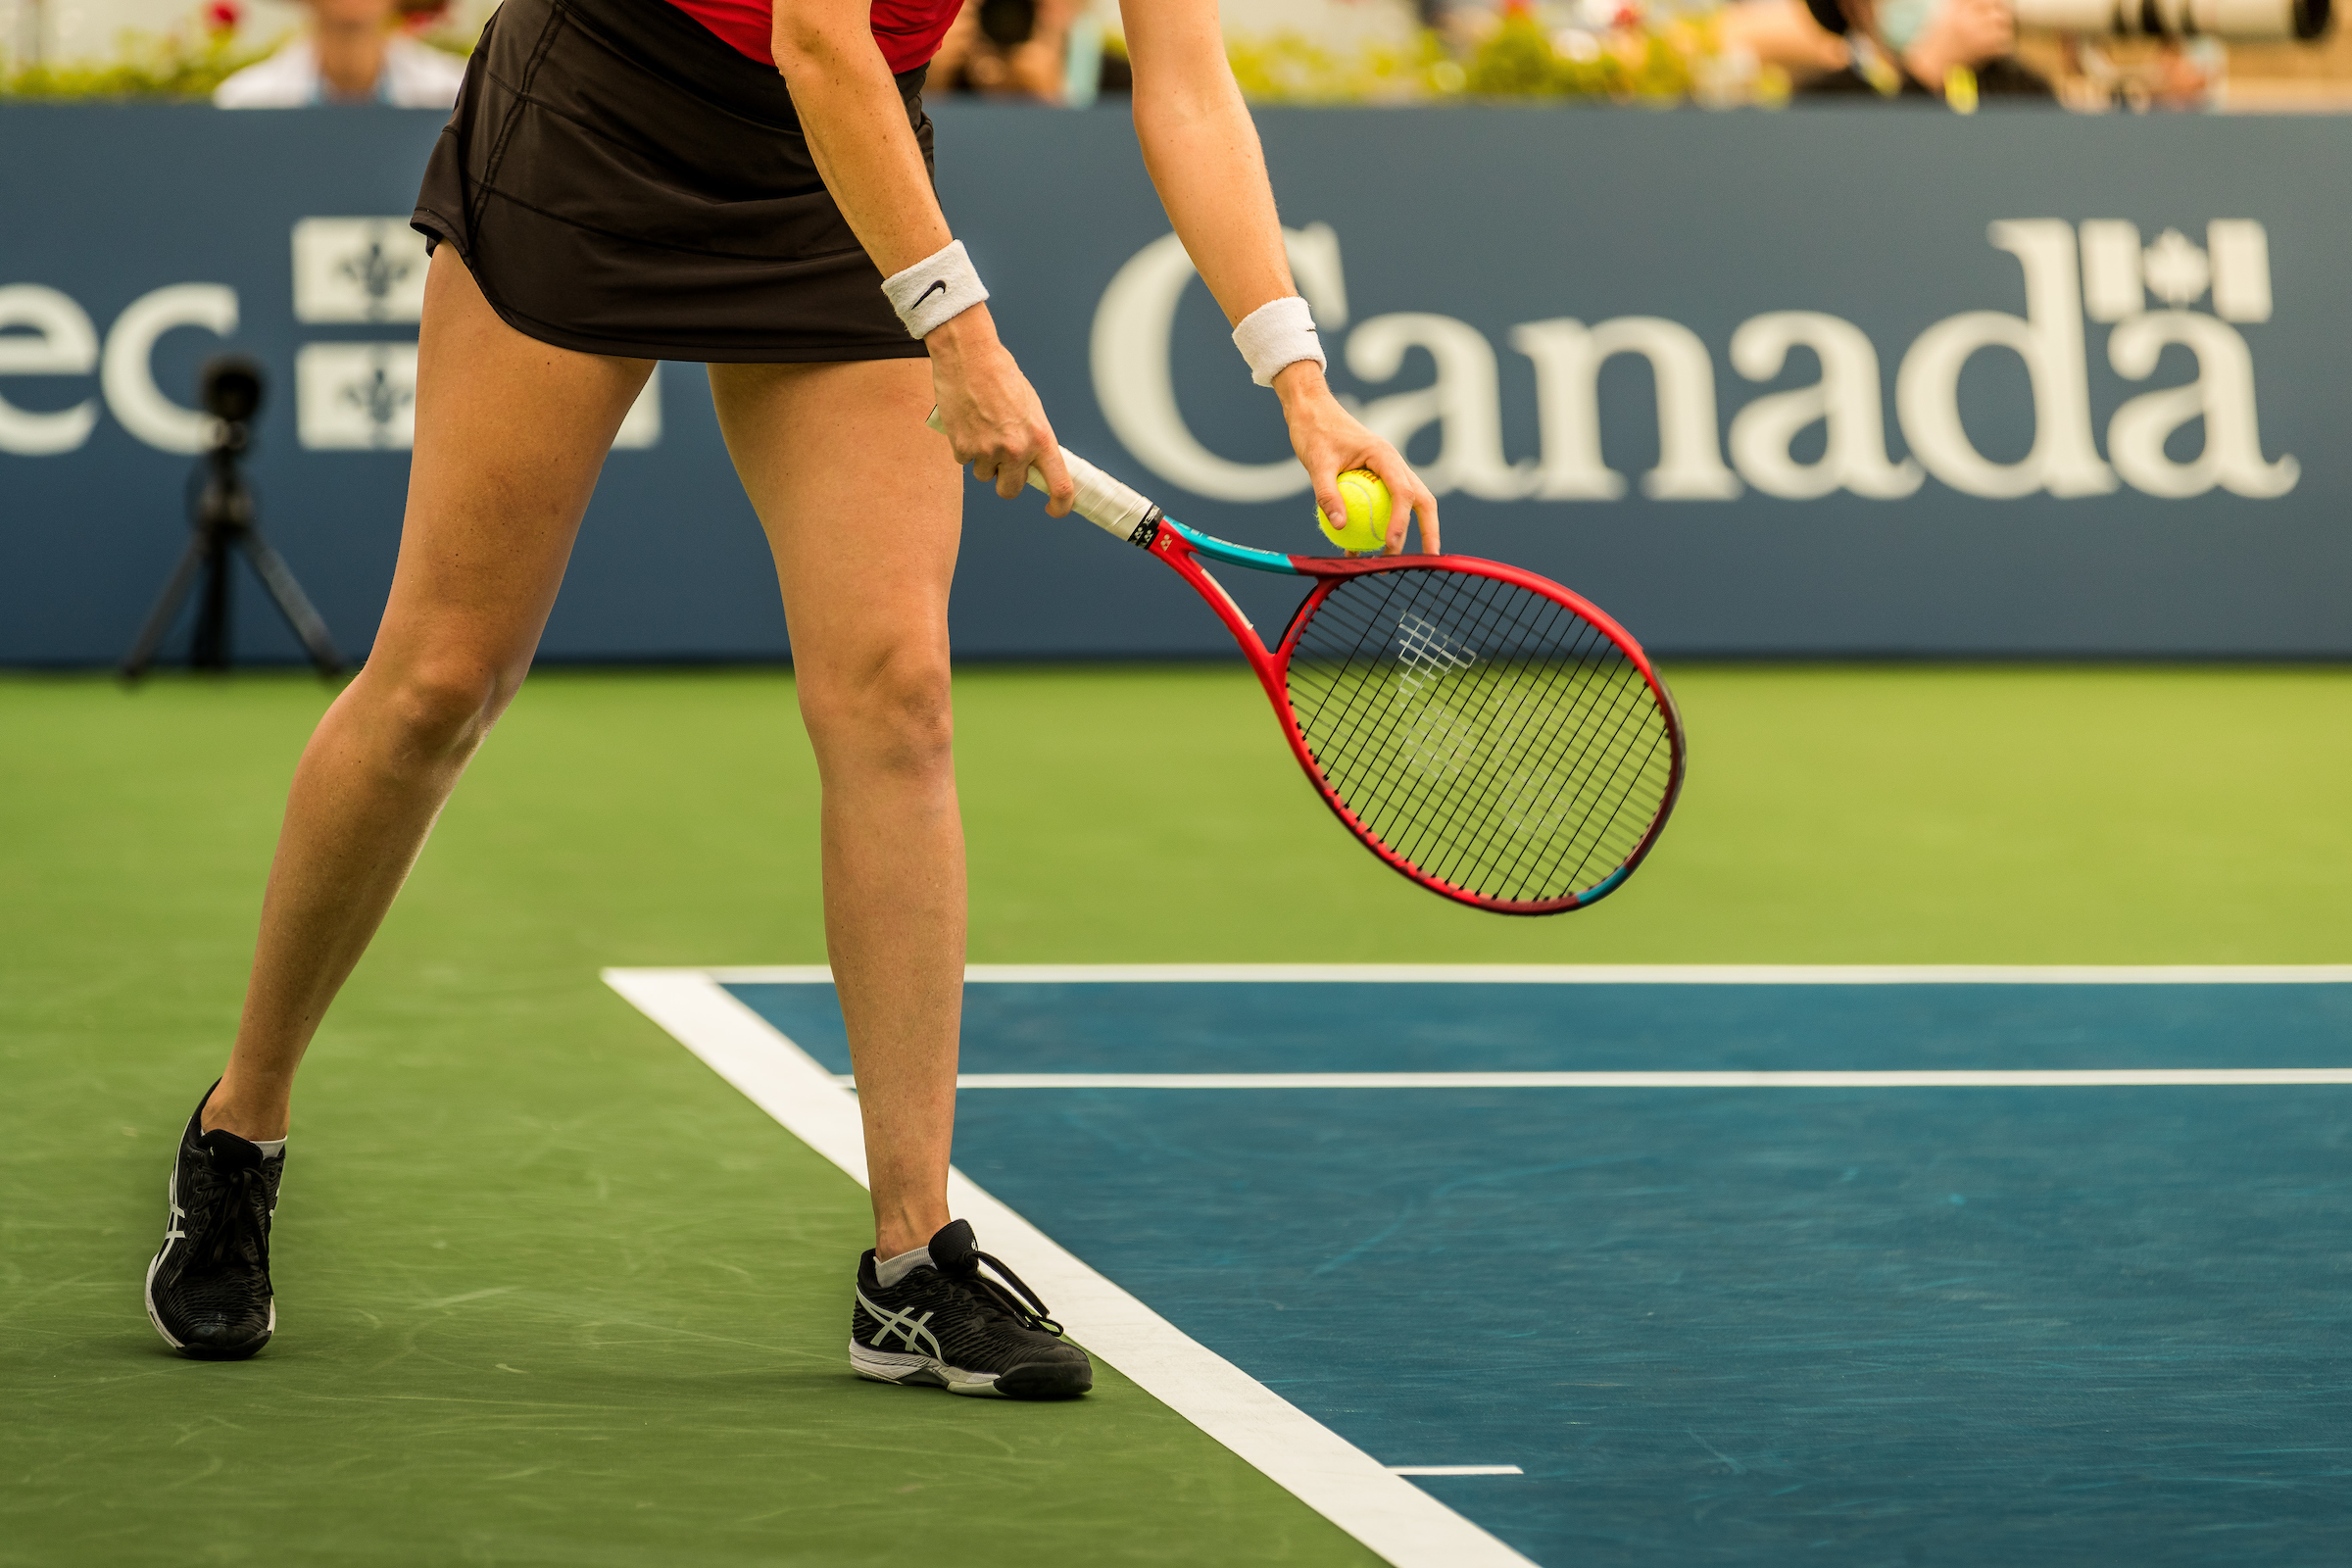 tennis player ready to serve, viewed from waist down